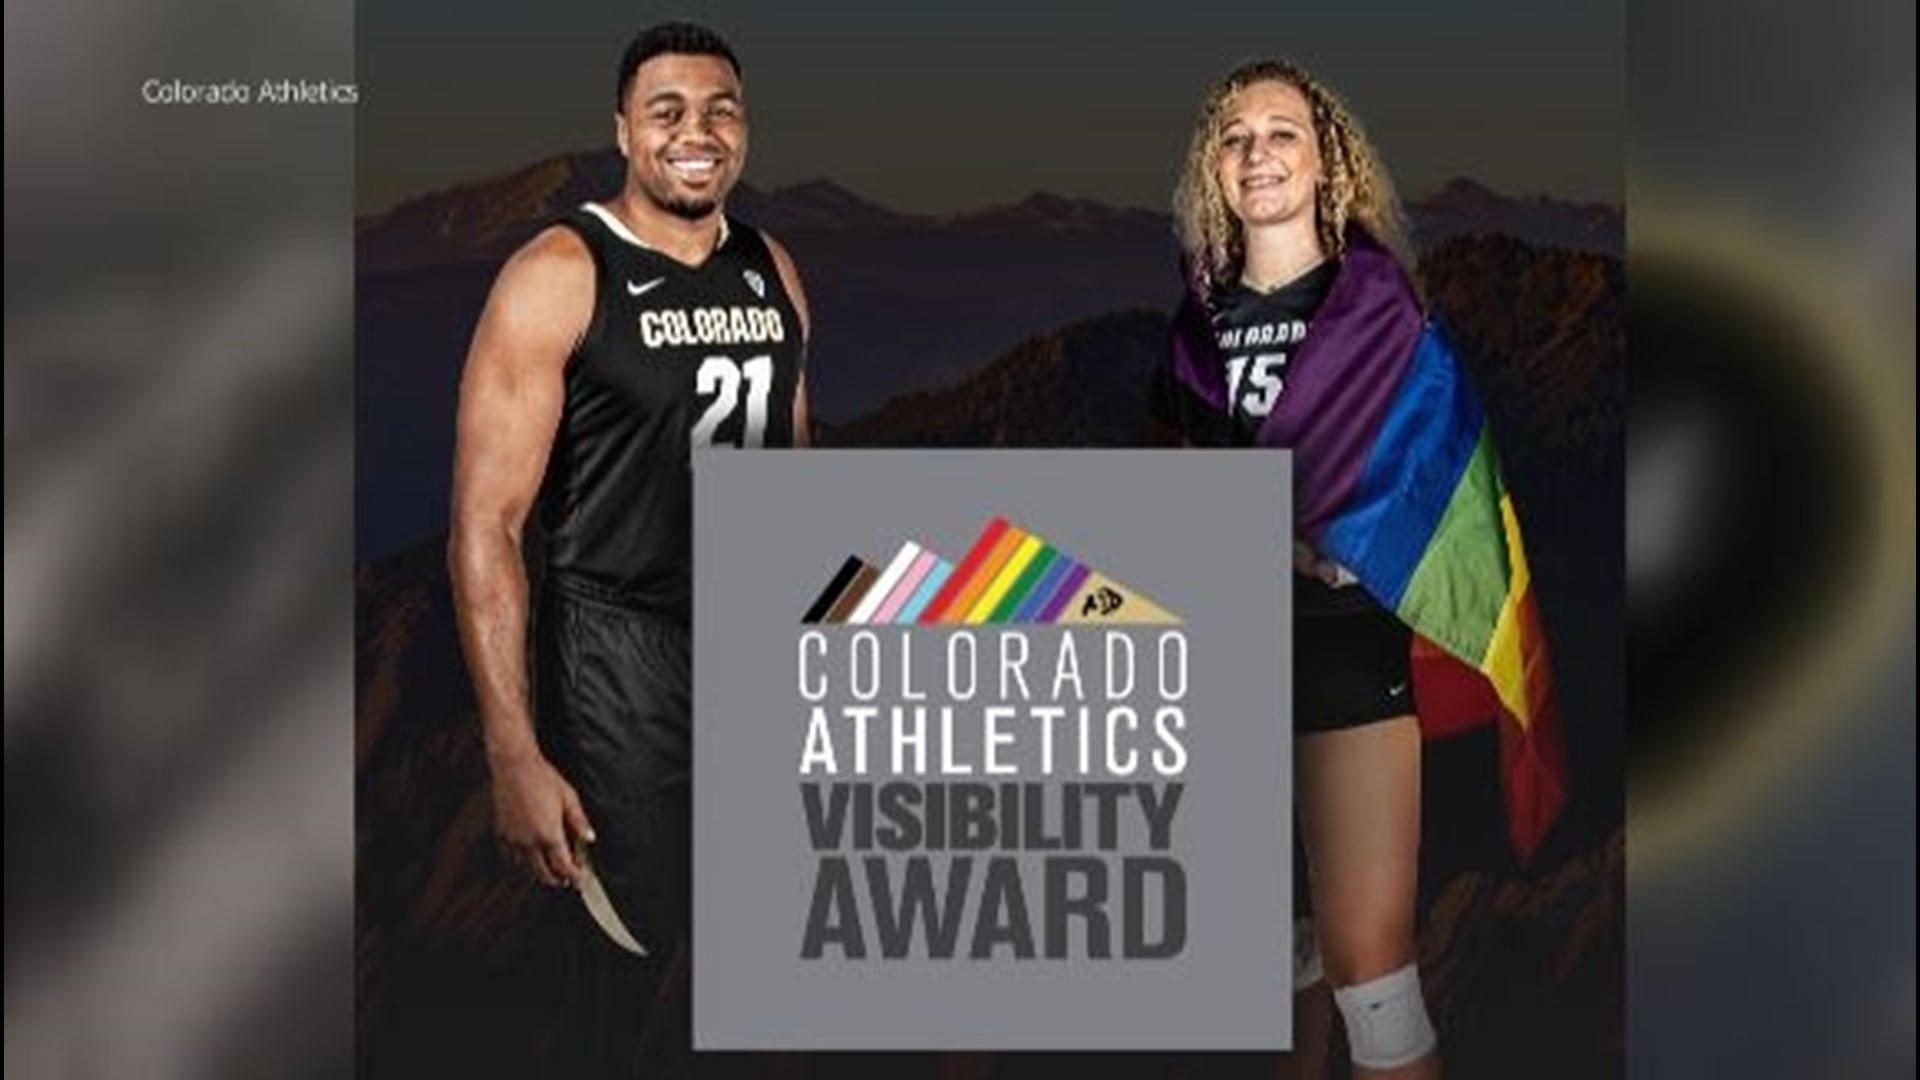 The Colorado Athletics Visibility Award is a $20,000 scholarship at the University of Colorado Boulder, which was awarded this year to Evan Battey and Alexia Kuehl.